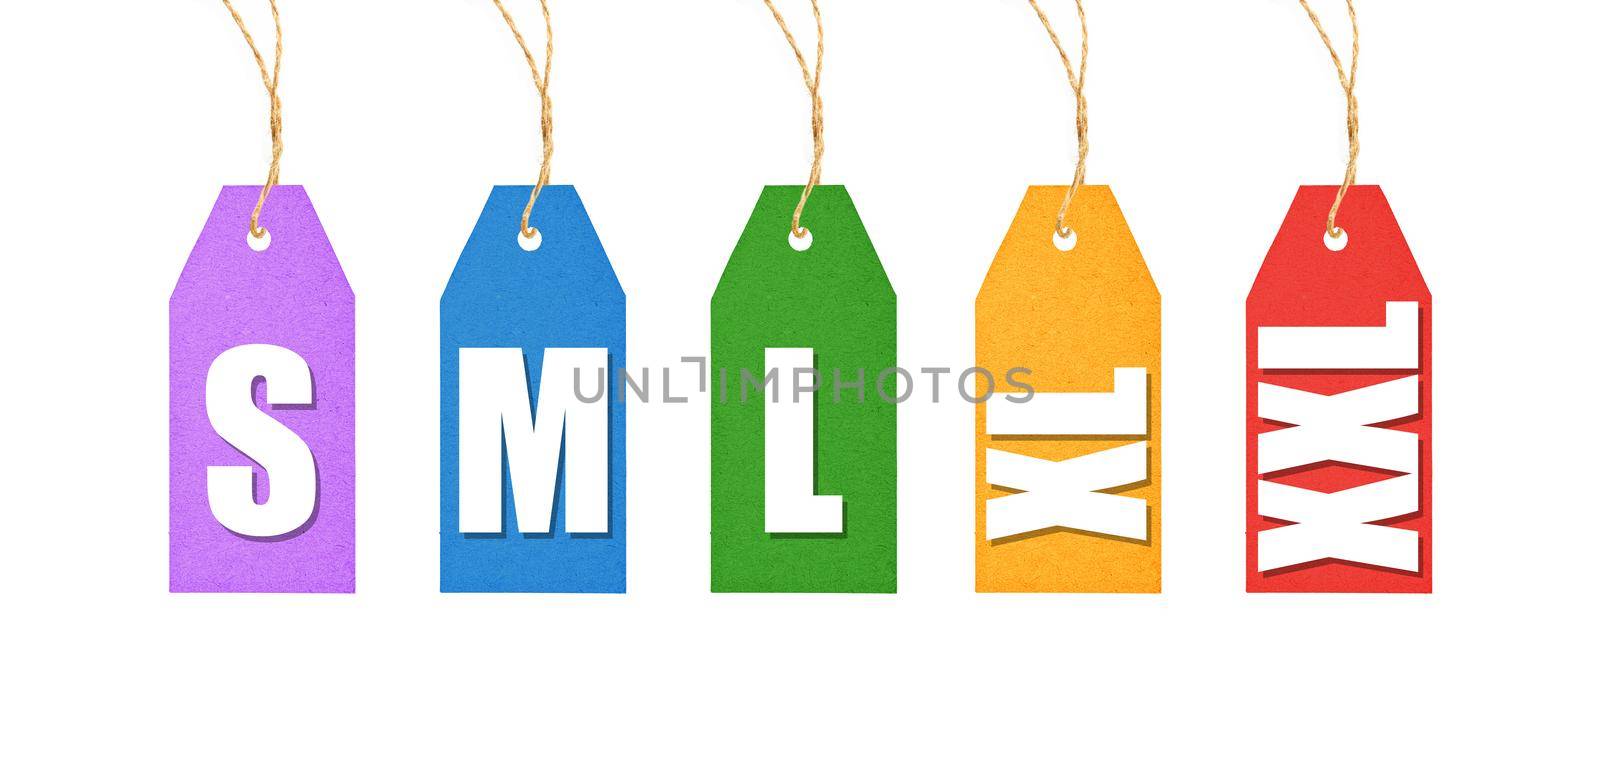 Set of colorful multicolor paper label tags with sizes message, S, M, L, XL, XXL, hanging on twine strings isolated on white background